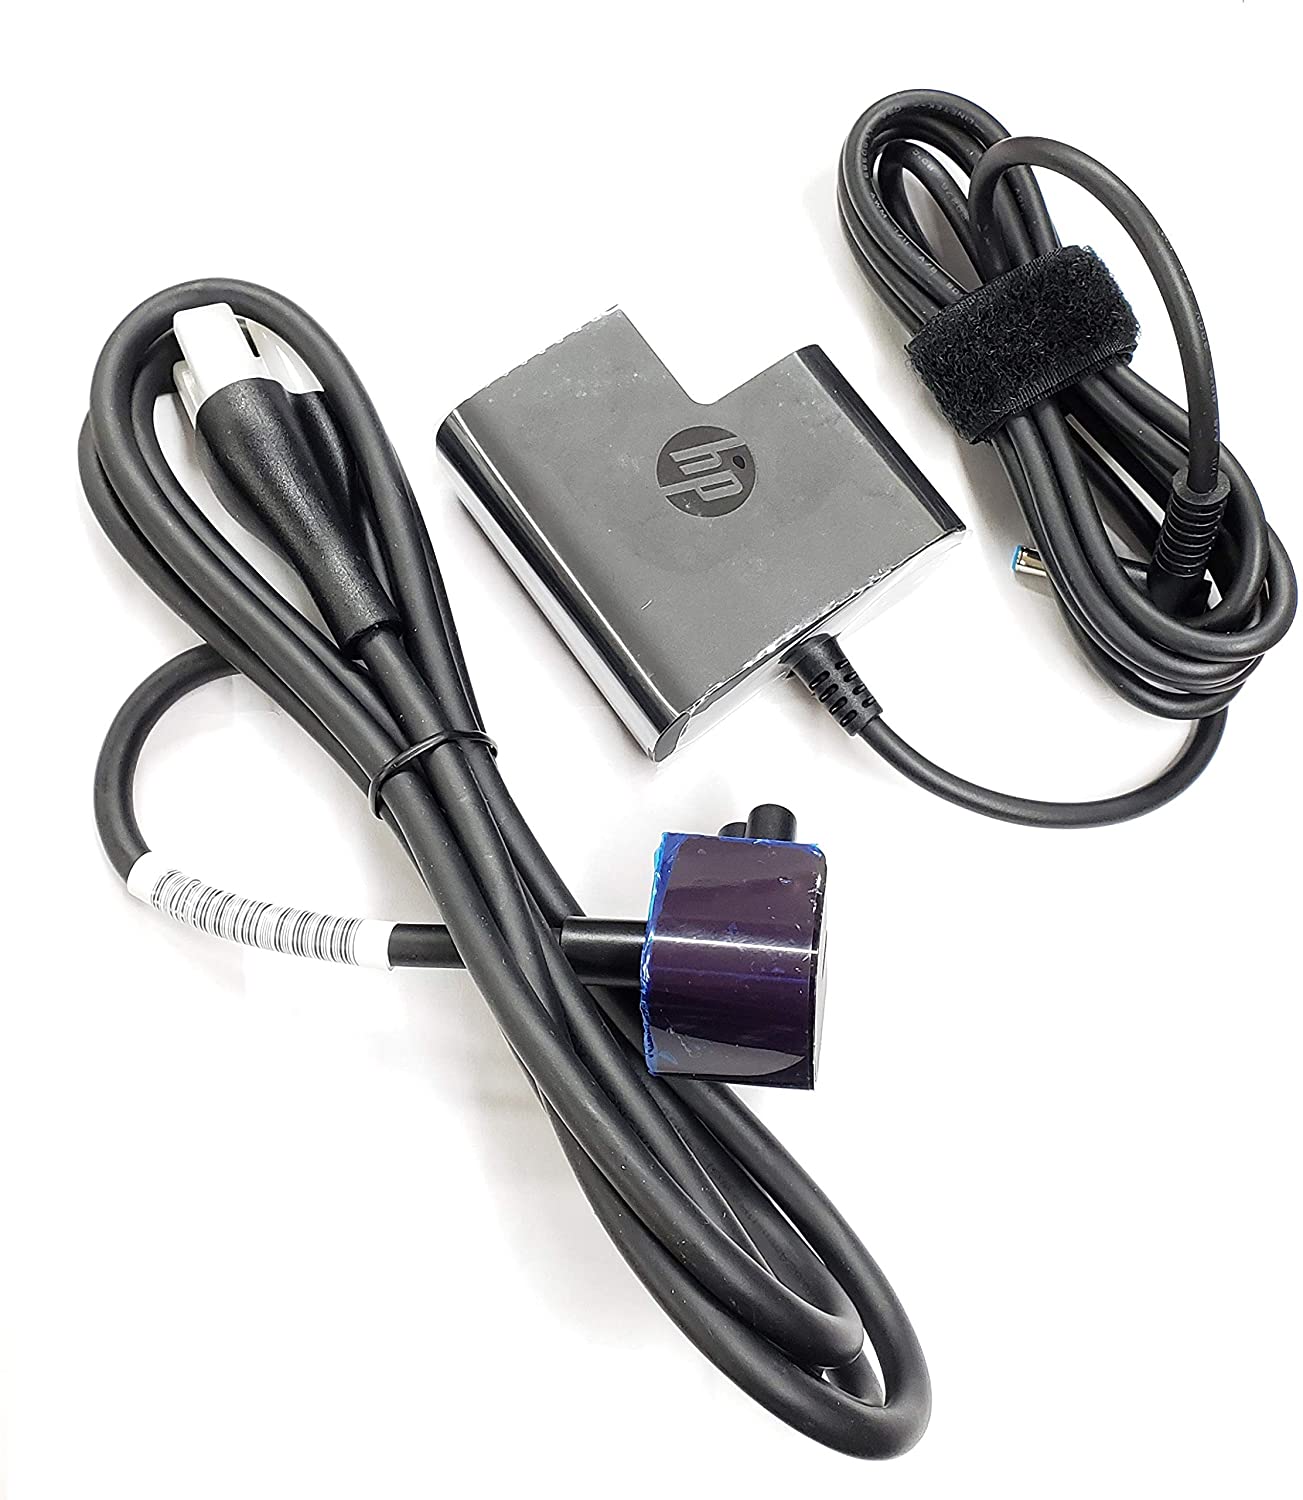 45W Original HP Envy x360 13-ag0007au Charger AC Adapter Power Supply